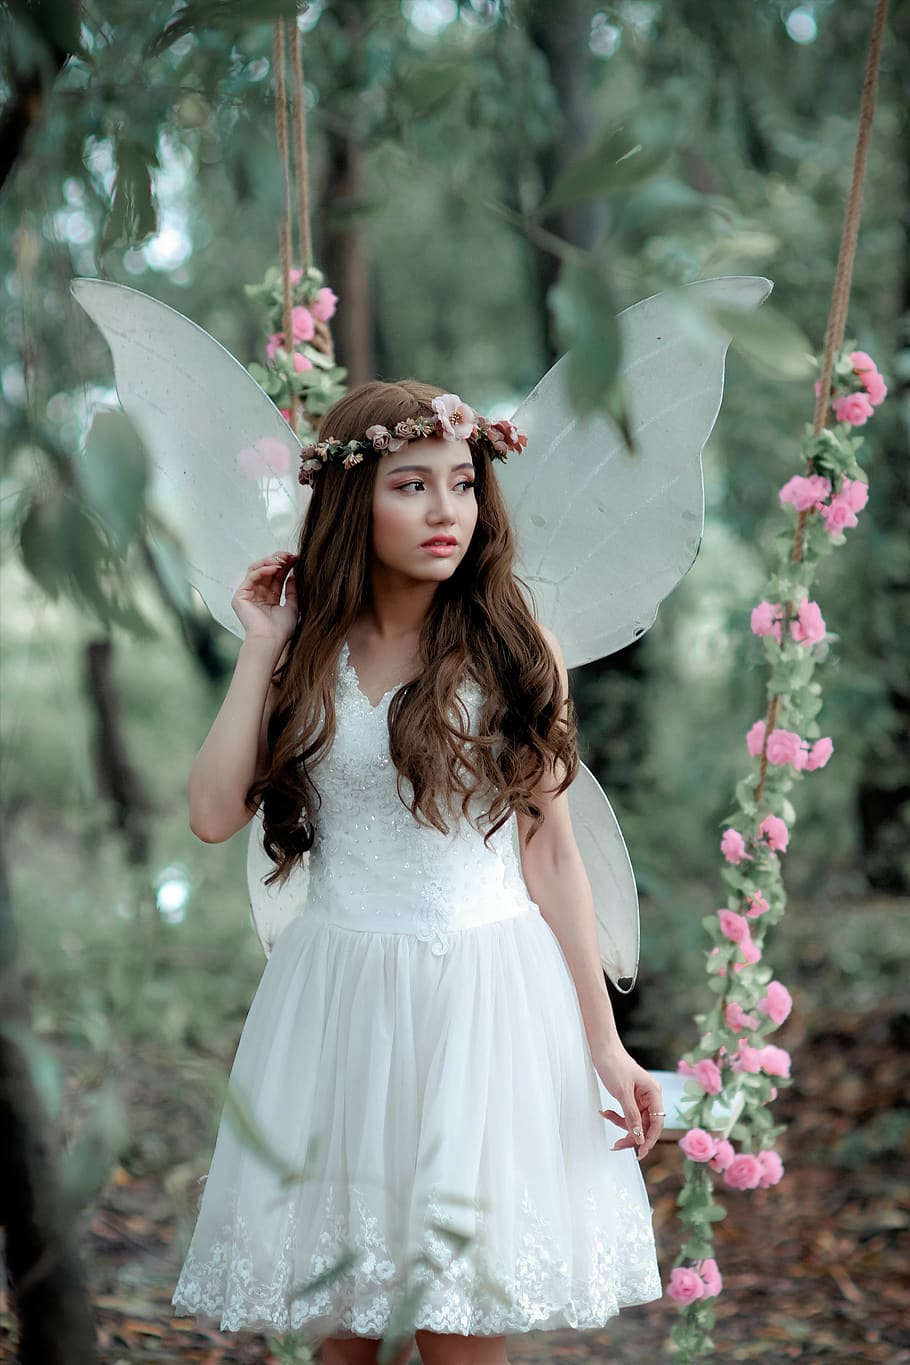 Woman Doing Photoshoot While In Fairy Costume, beautiful, cute